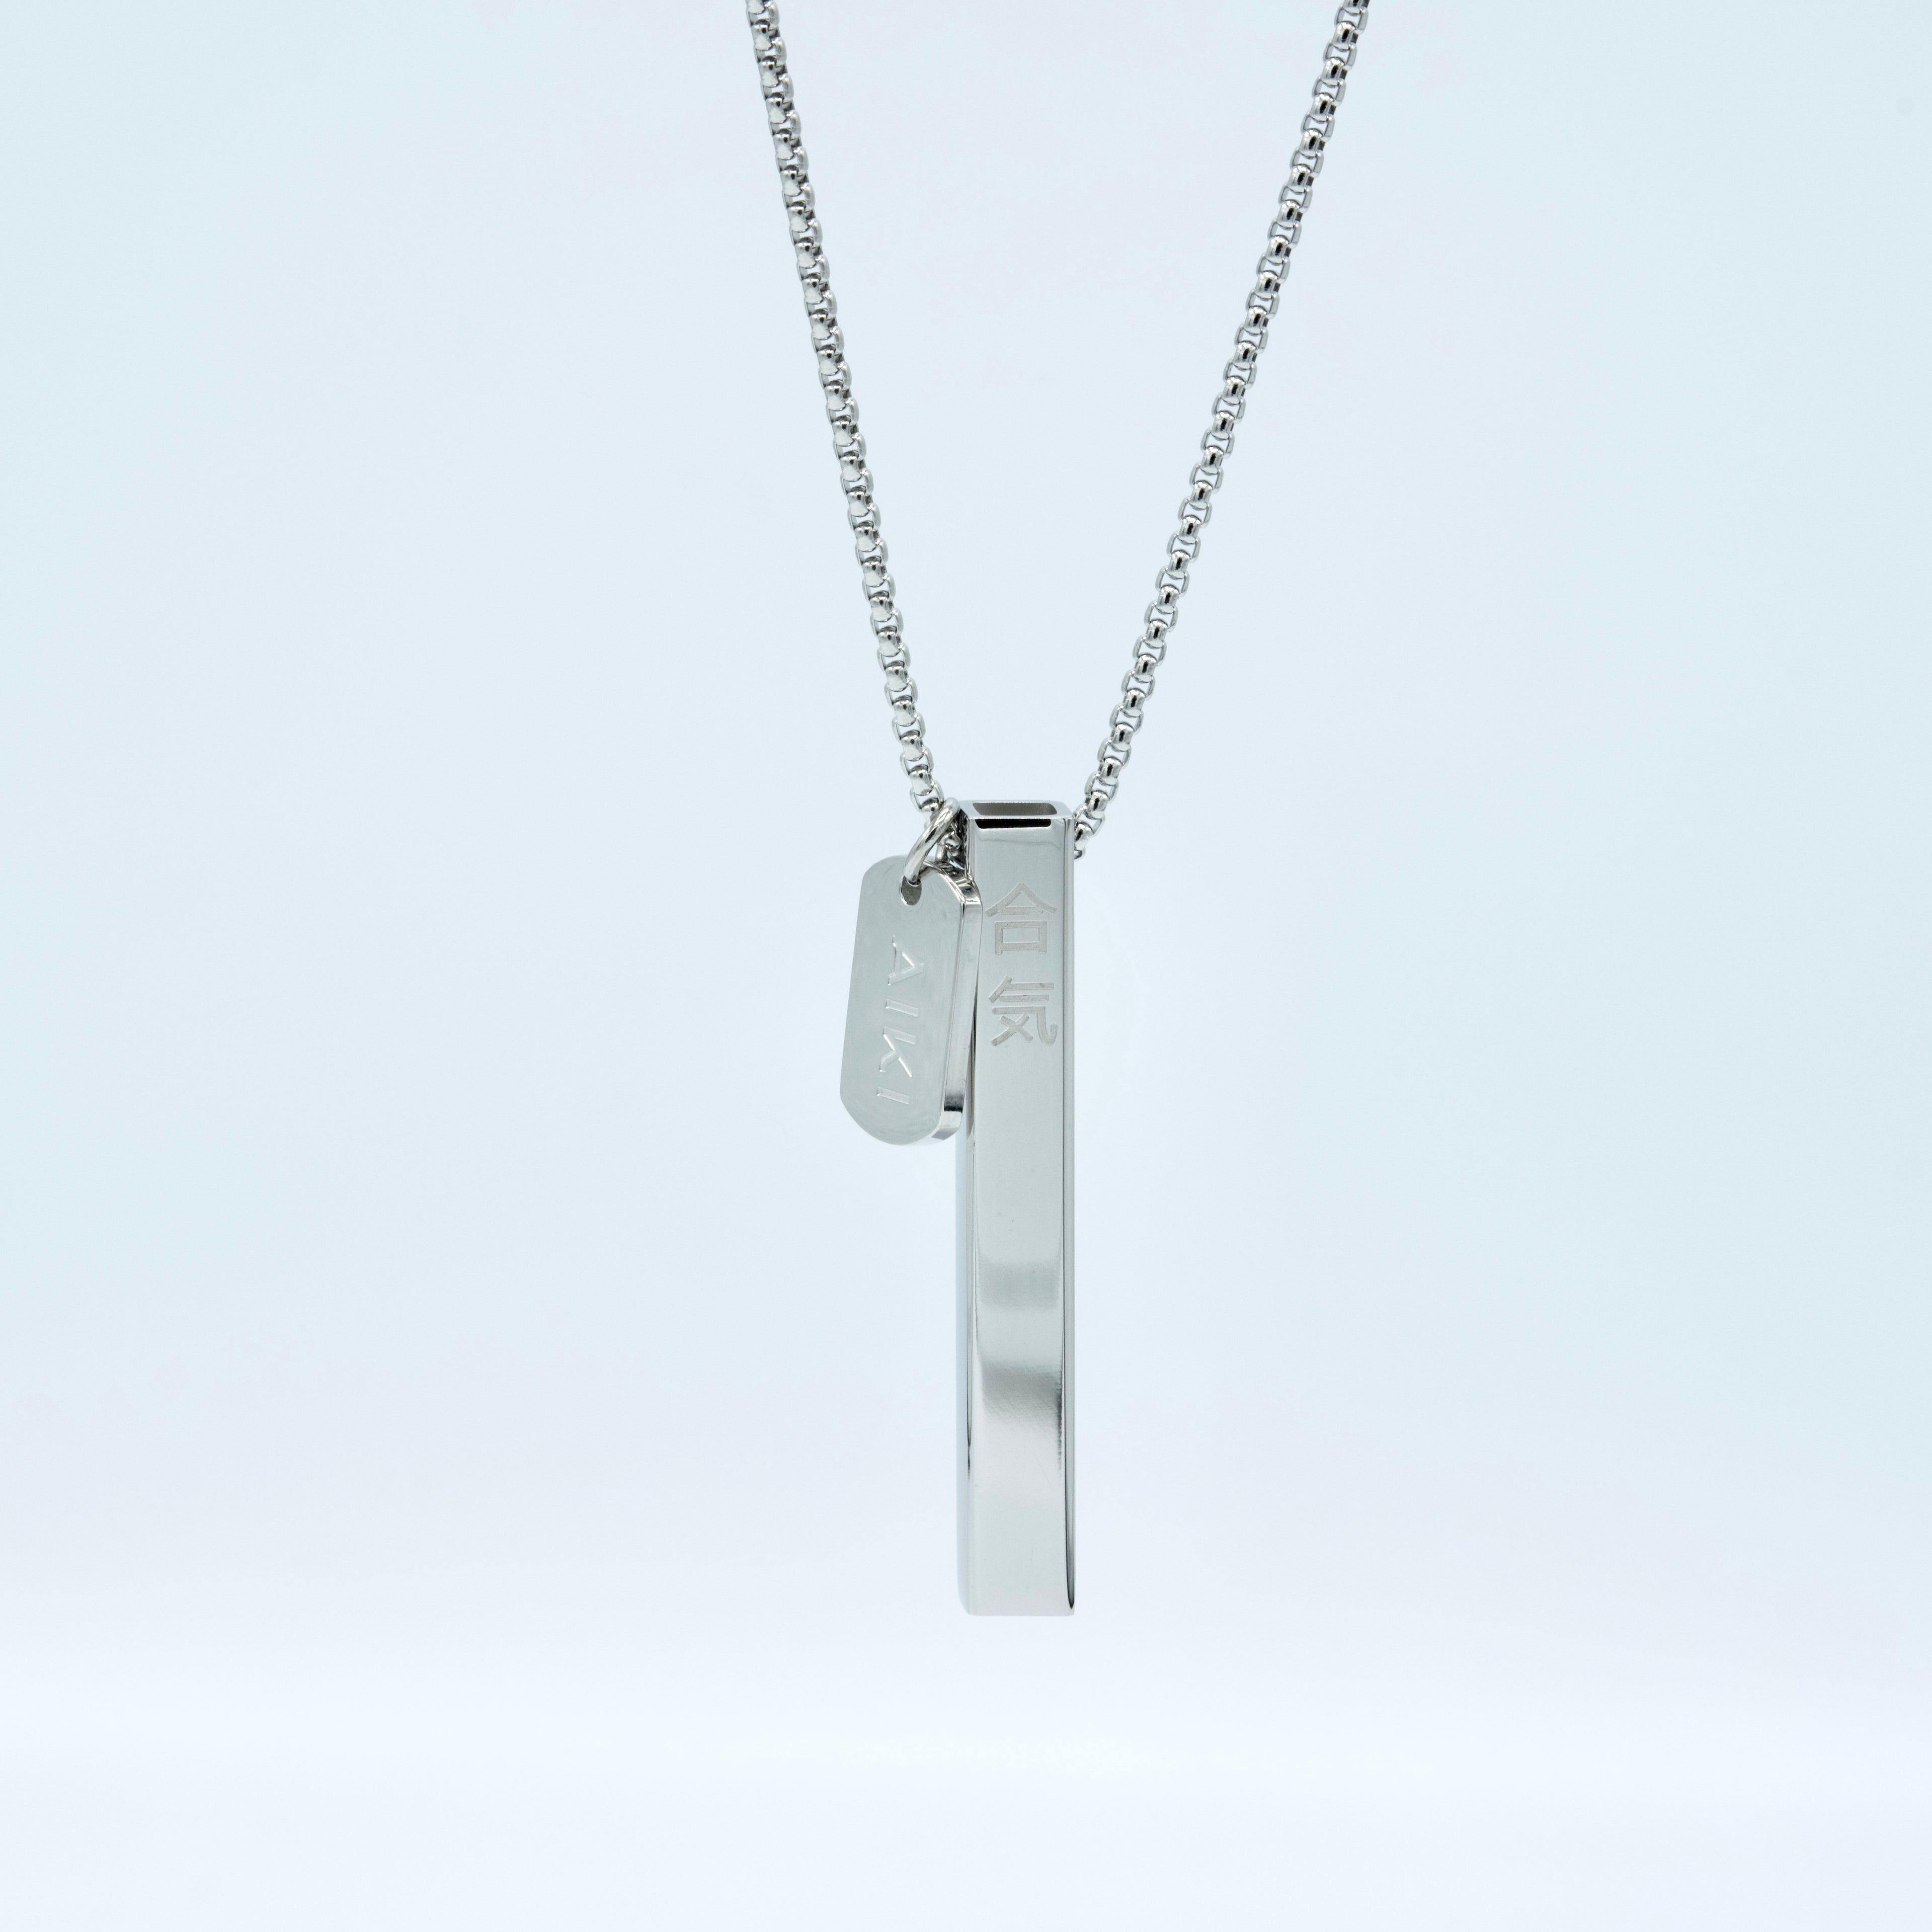 AIKI Solid Square – Sterling Silver